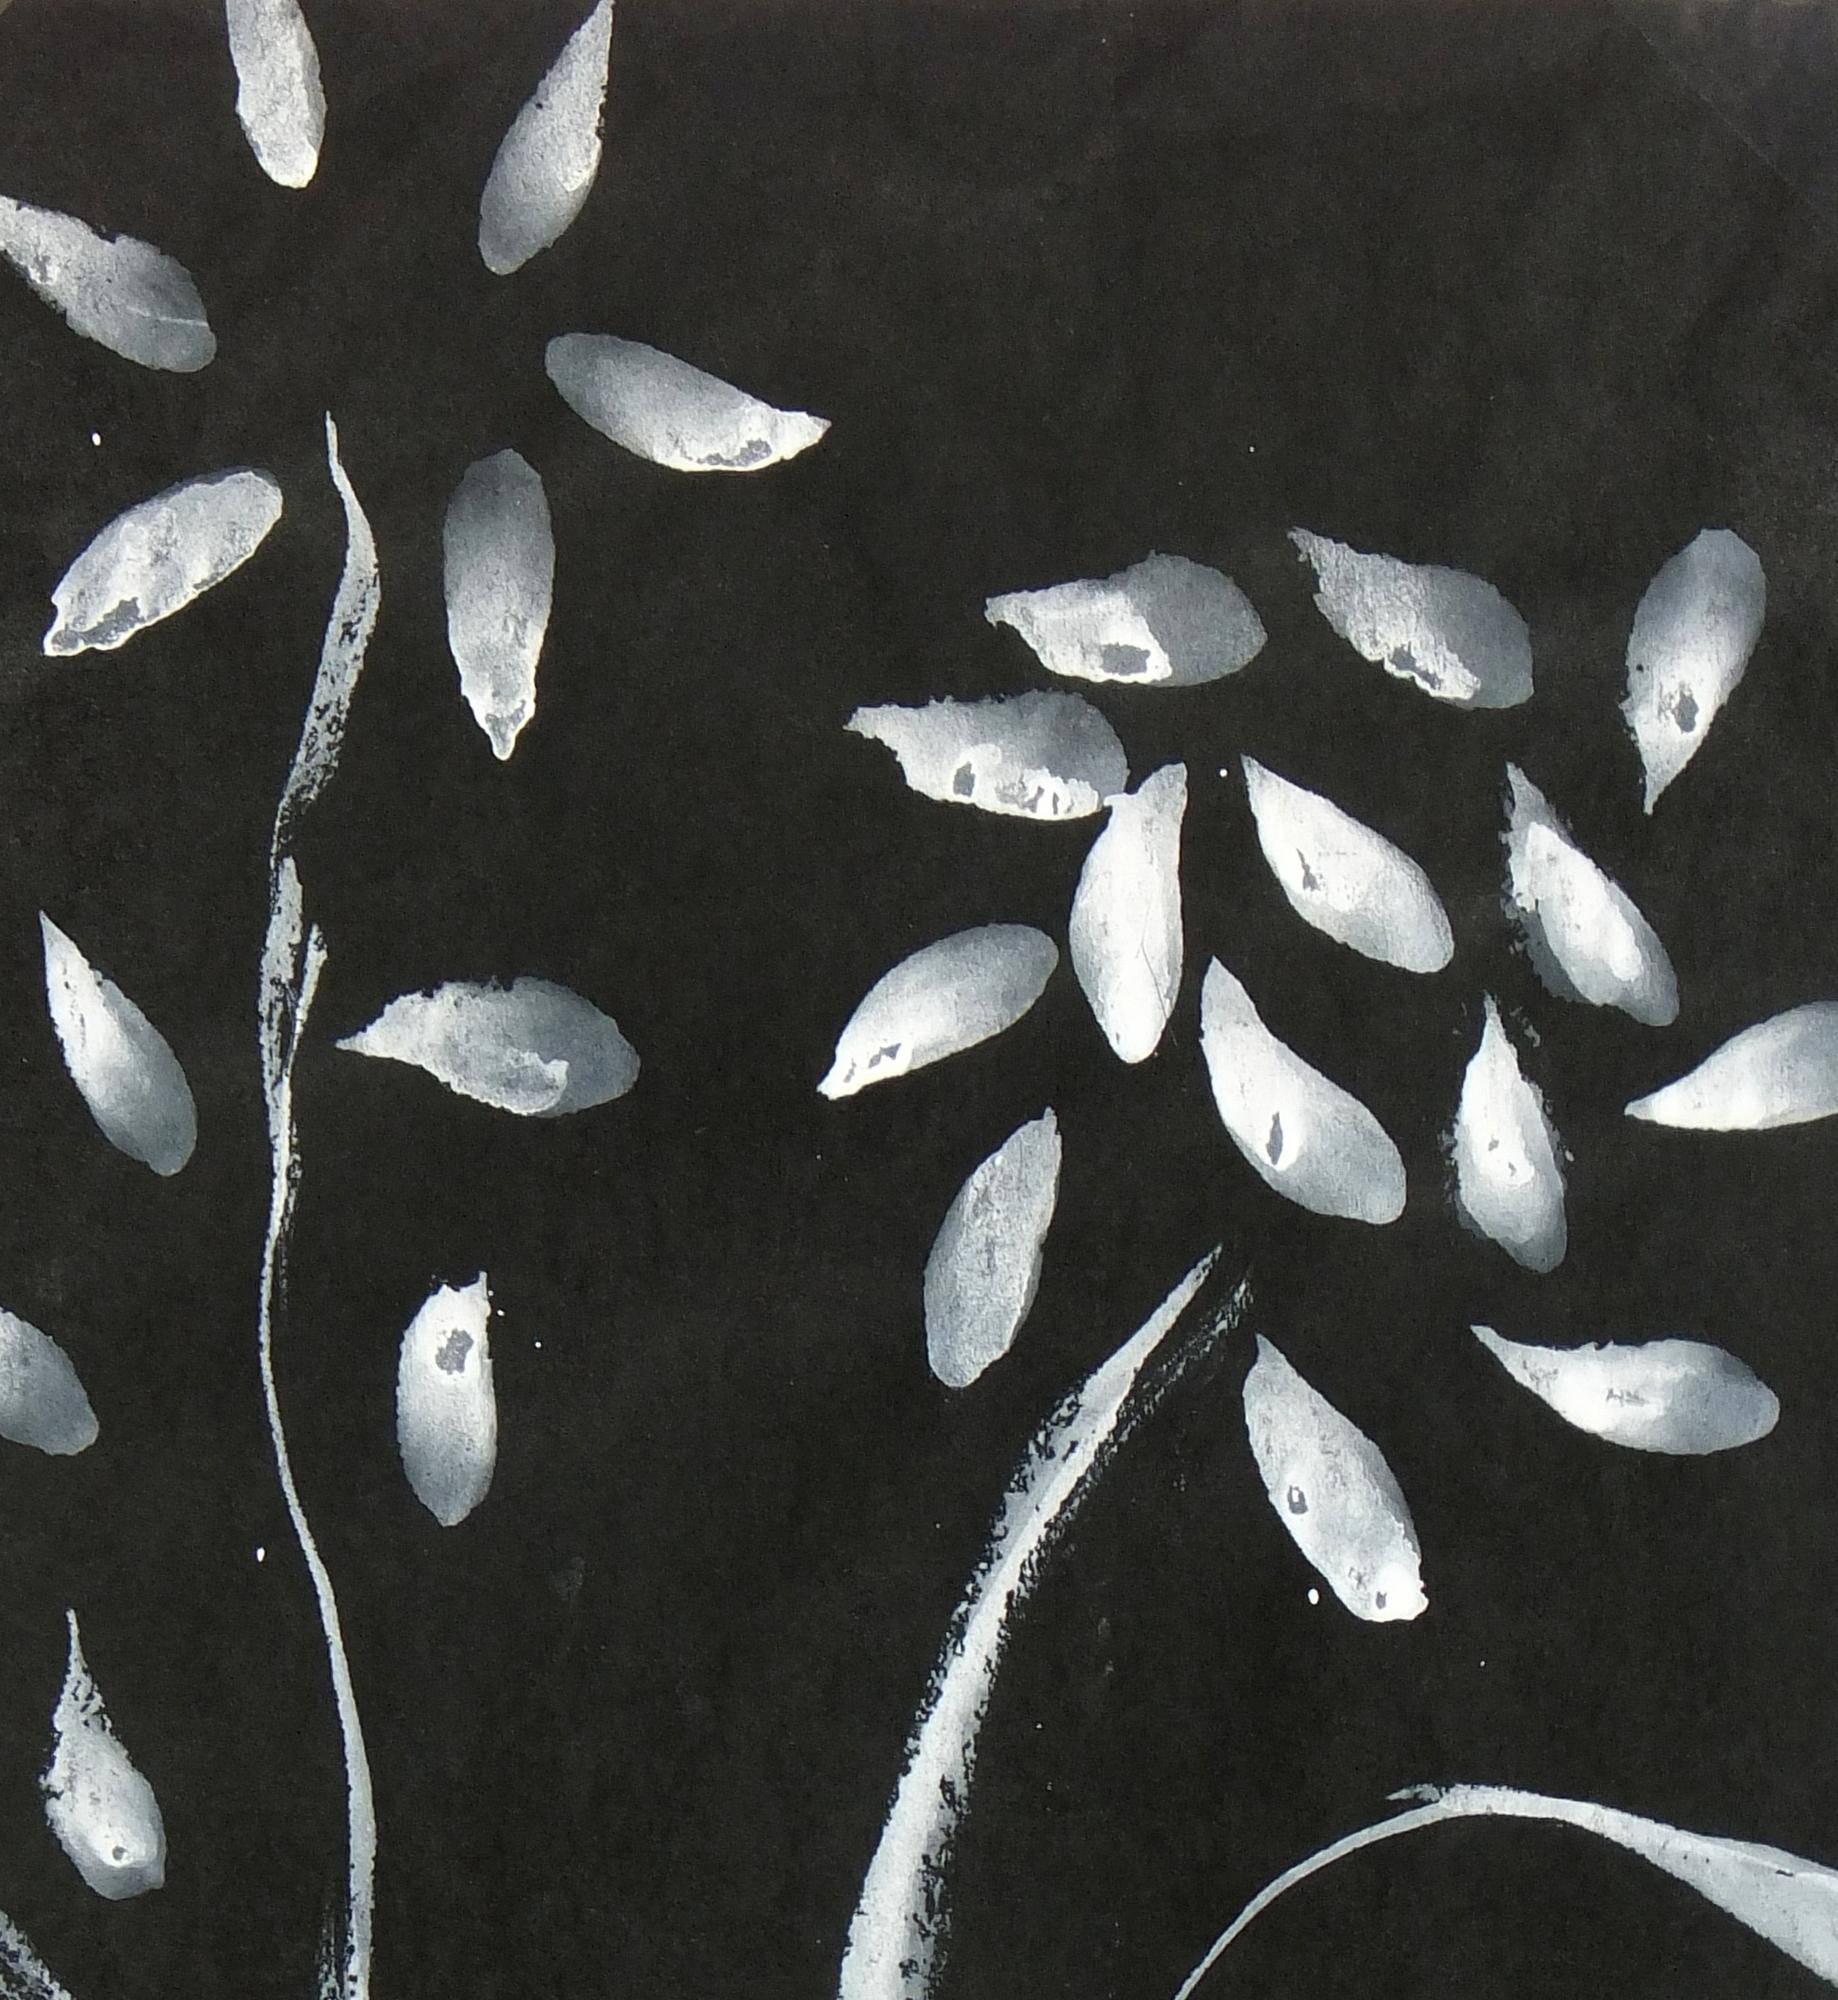 black and white flower paintings